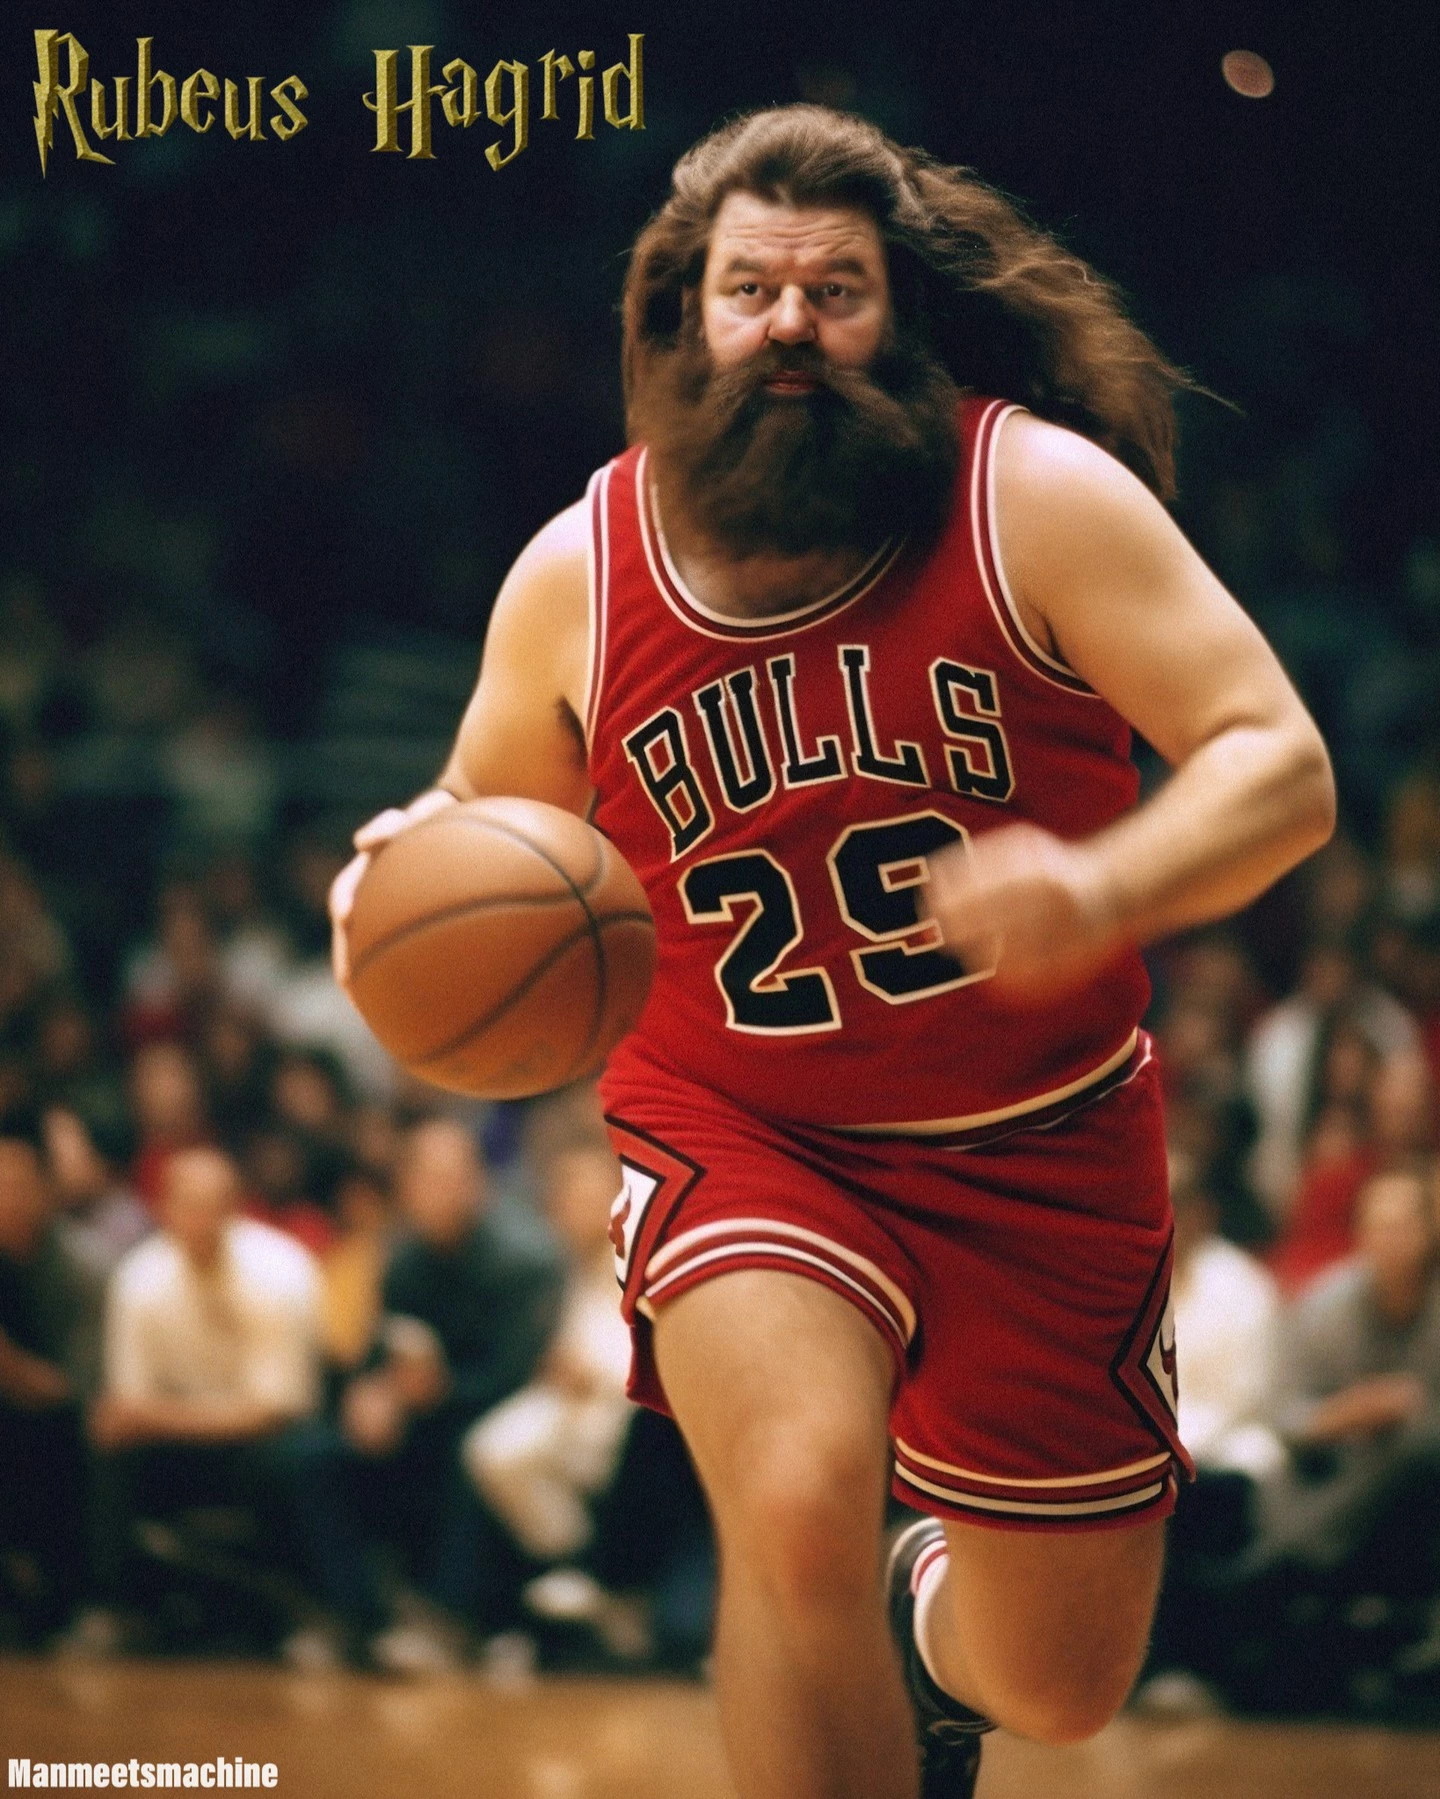 For A Guy His Size, Hagrid Is Pretty Fast As A Basketball Player